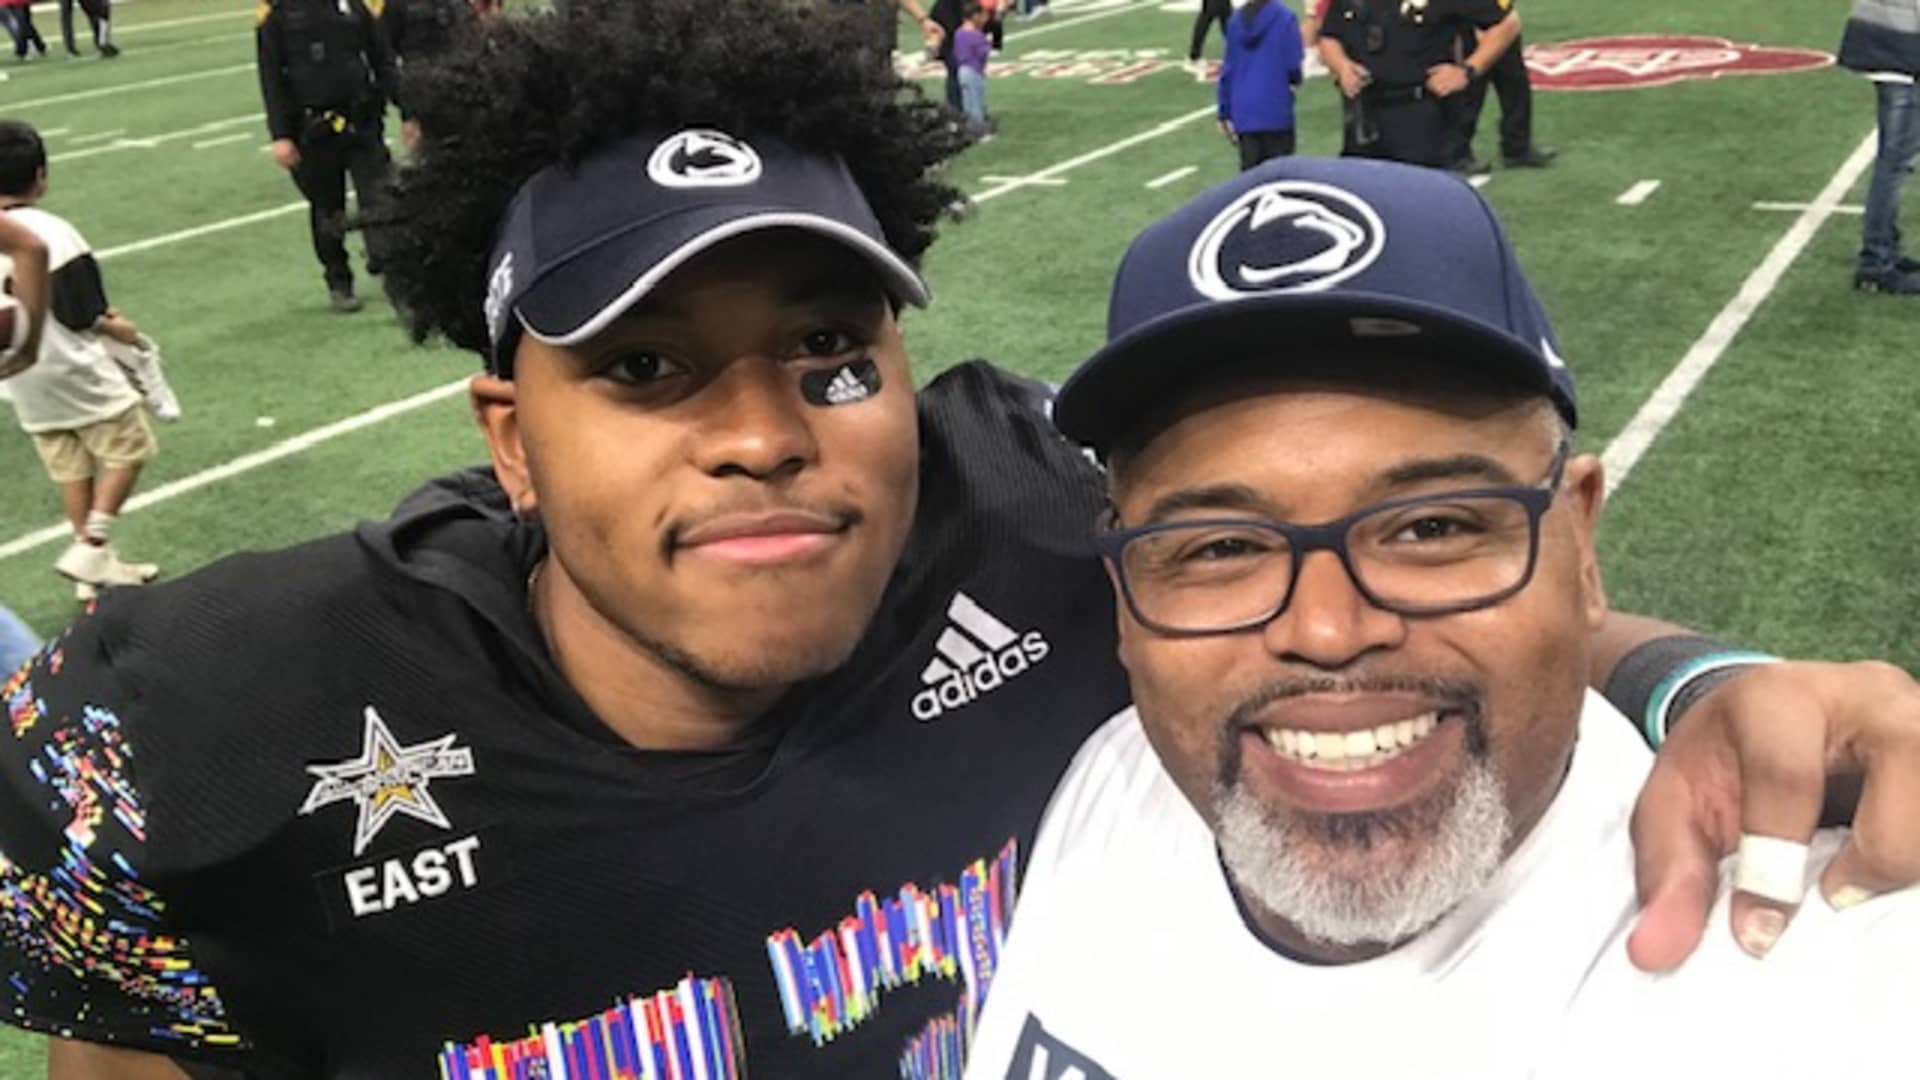 Penn State offensive lineman Caedan Wallace, pictured with his father, is currently juggling deals with a car dealership and athletic apparel store.